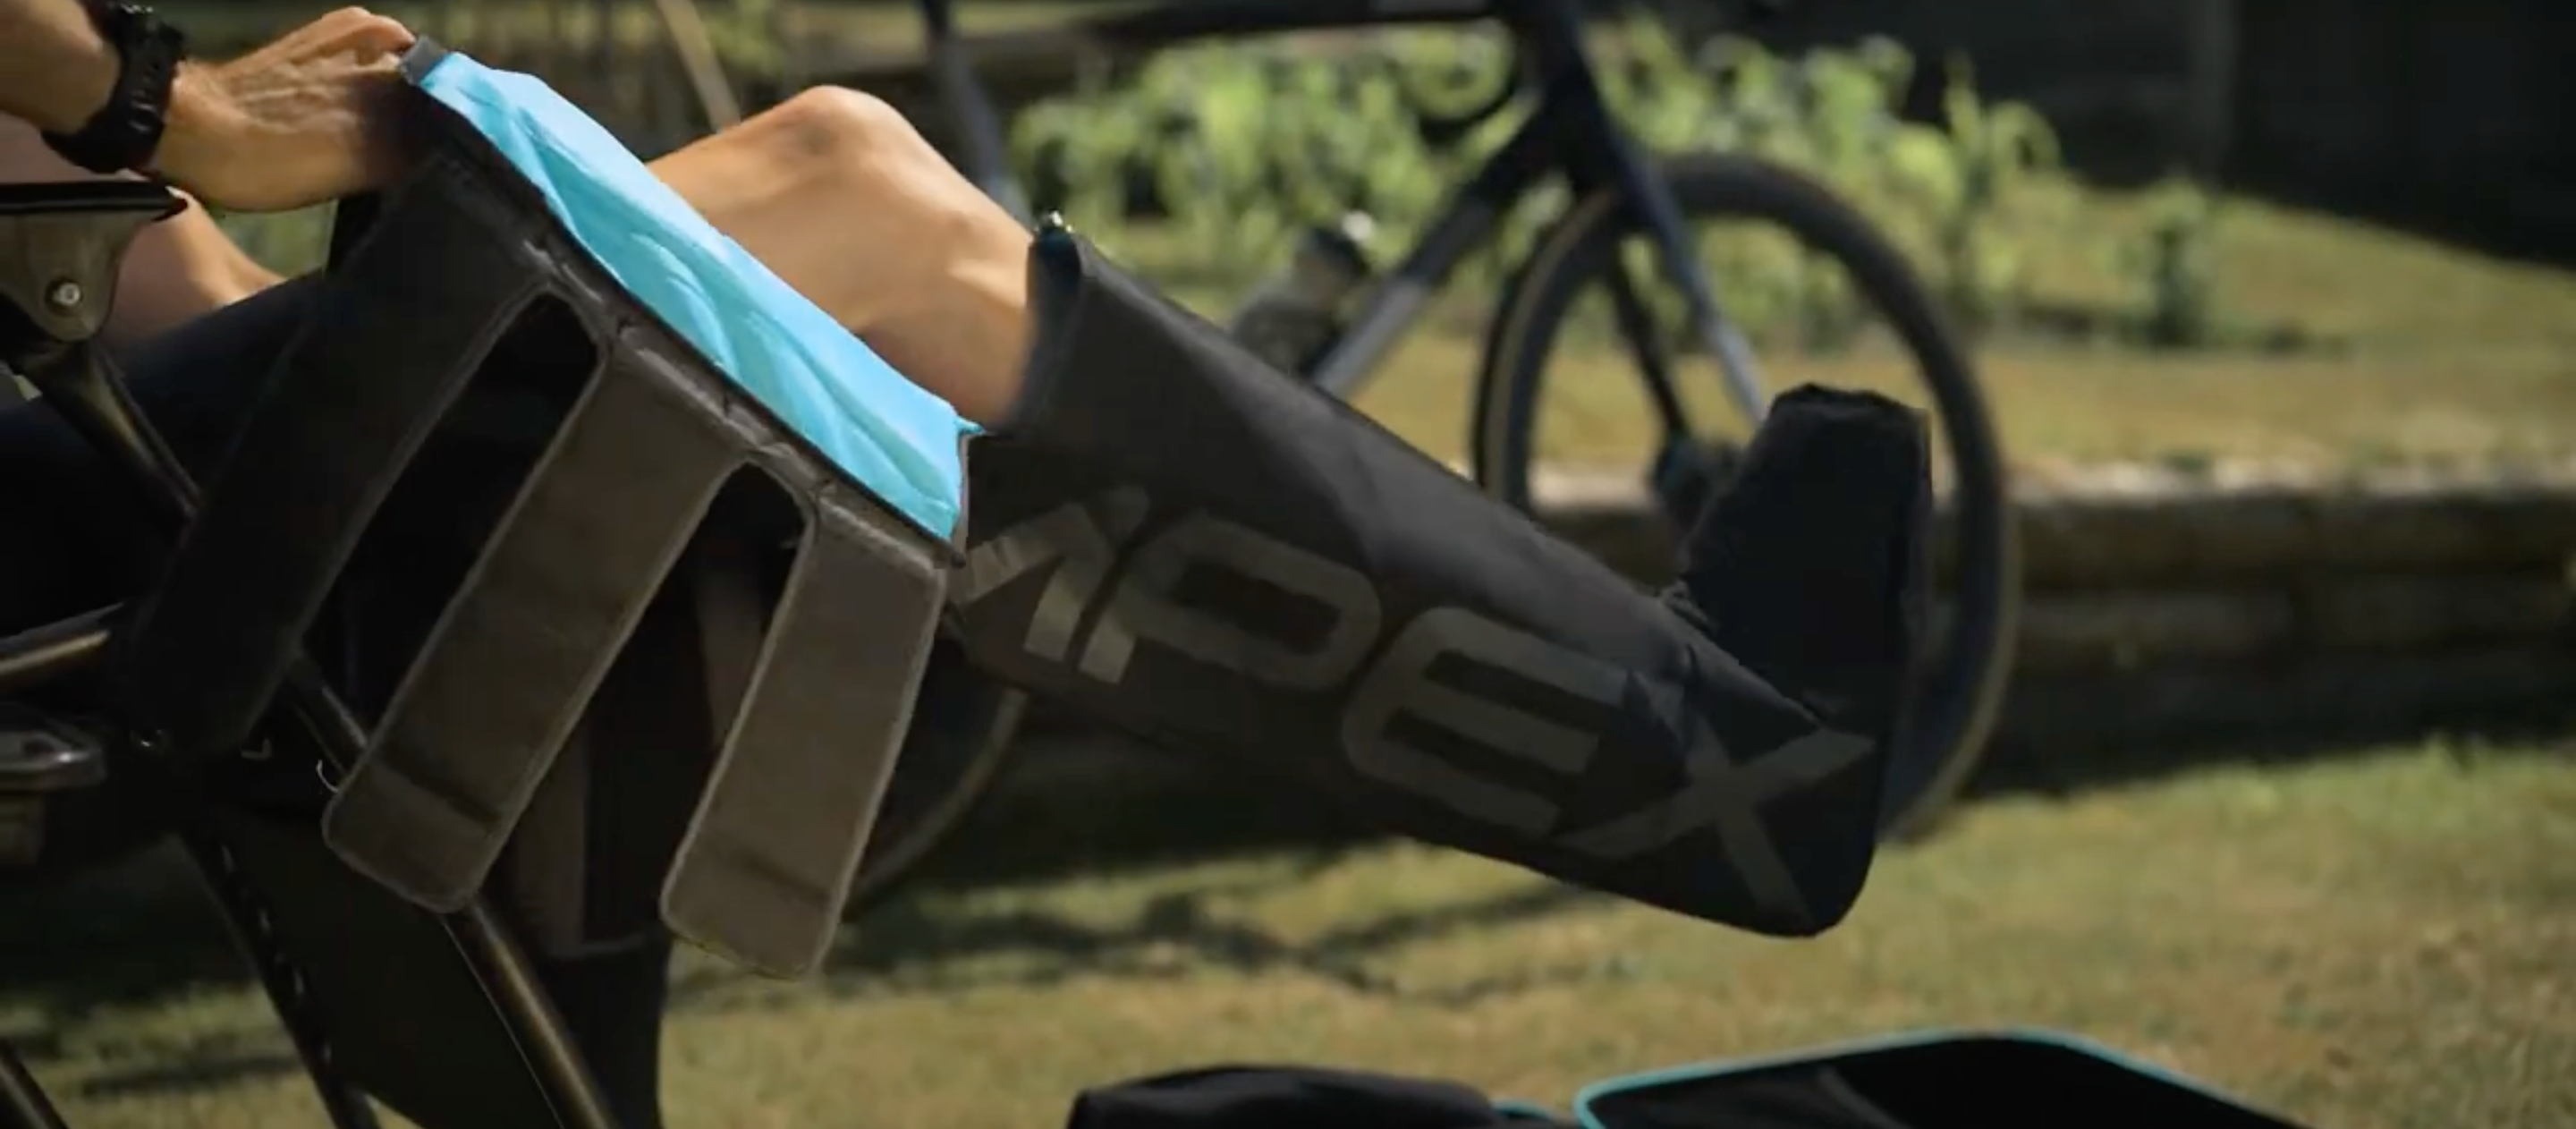 THE SCIENCE OF COMPRESSION BOOTS